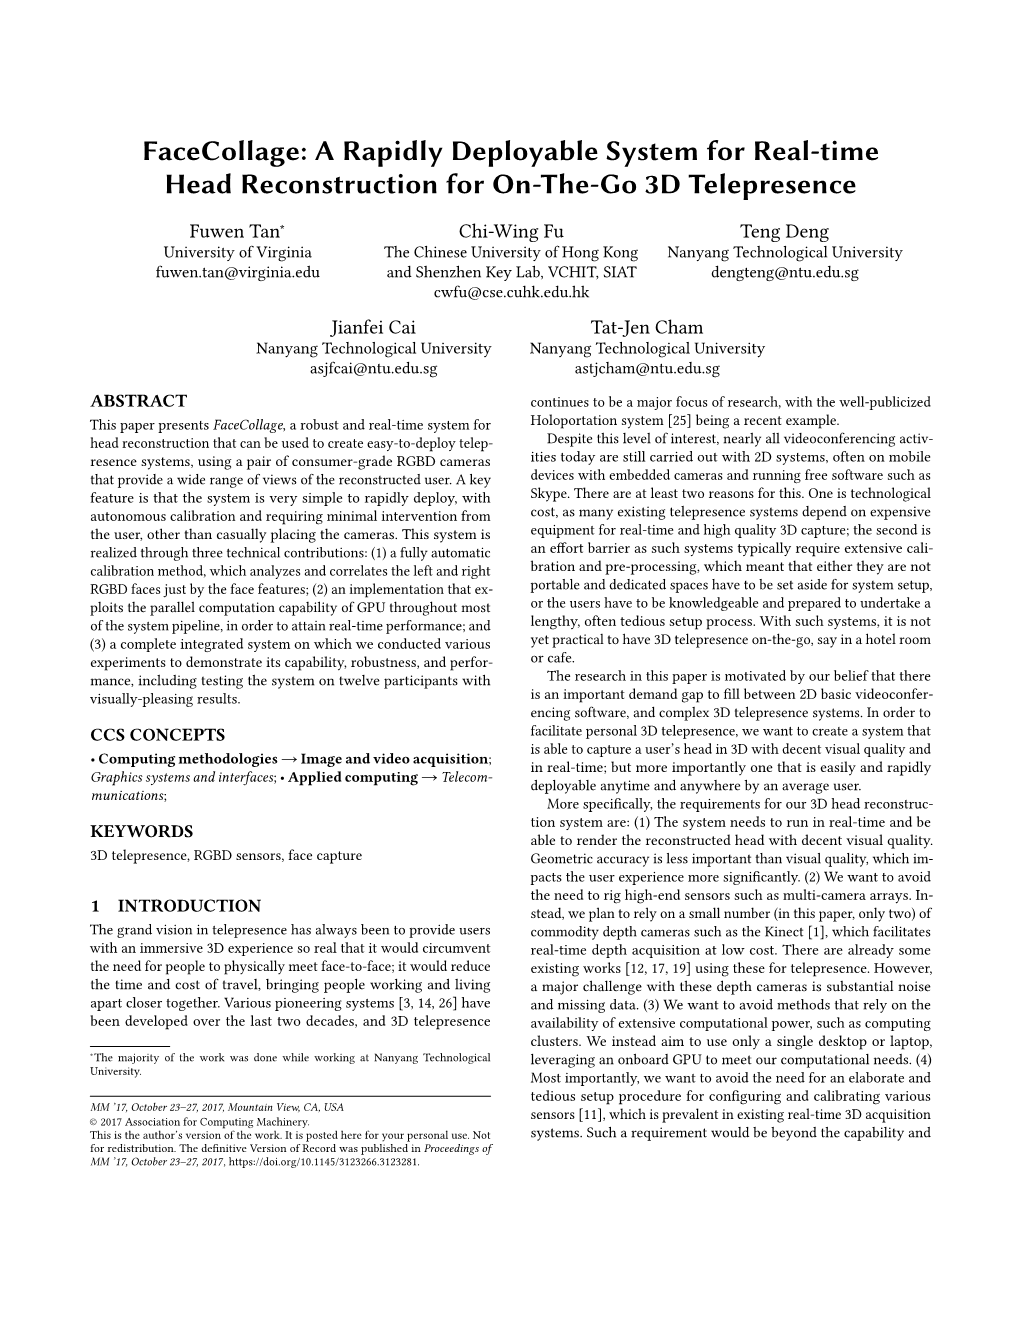 Facecollage: a Rapidly Deployable System for Real-Time Head Reconstruction for On-The-Go 3D Telepresence